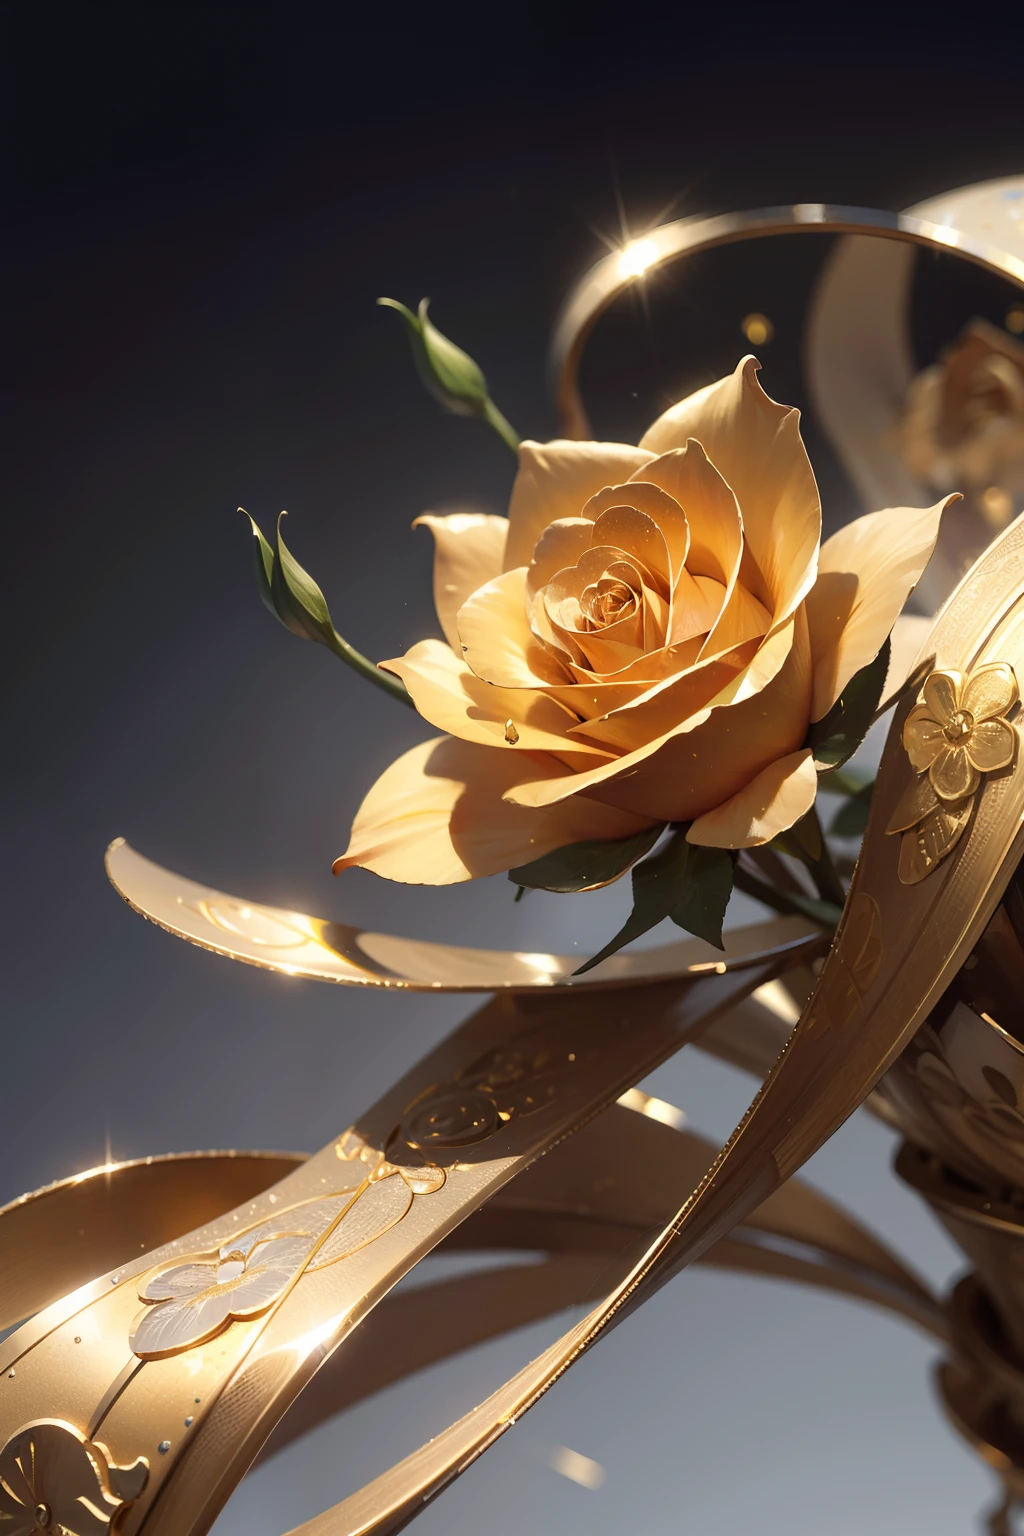 1 full golden all-metal rose，The petals connect to form a bridge，metalictexture，All metals，gold parts，Reflectoraterial of metal，golden flowers，super detailing，Ultra-clear image quality，solid color backdrop